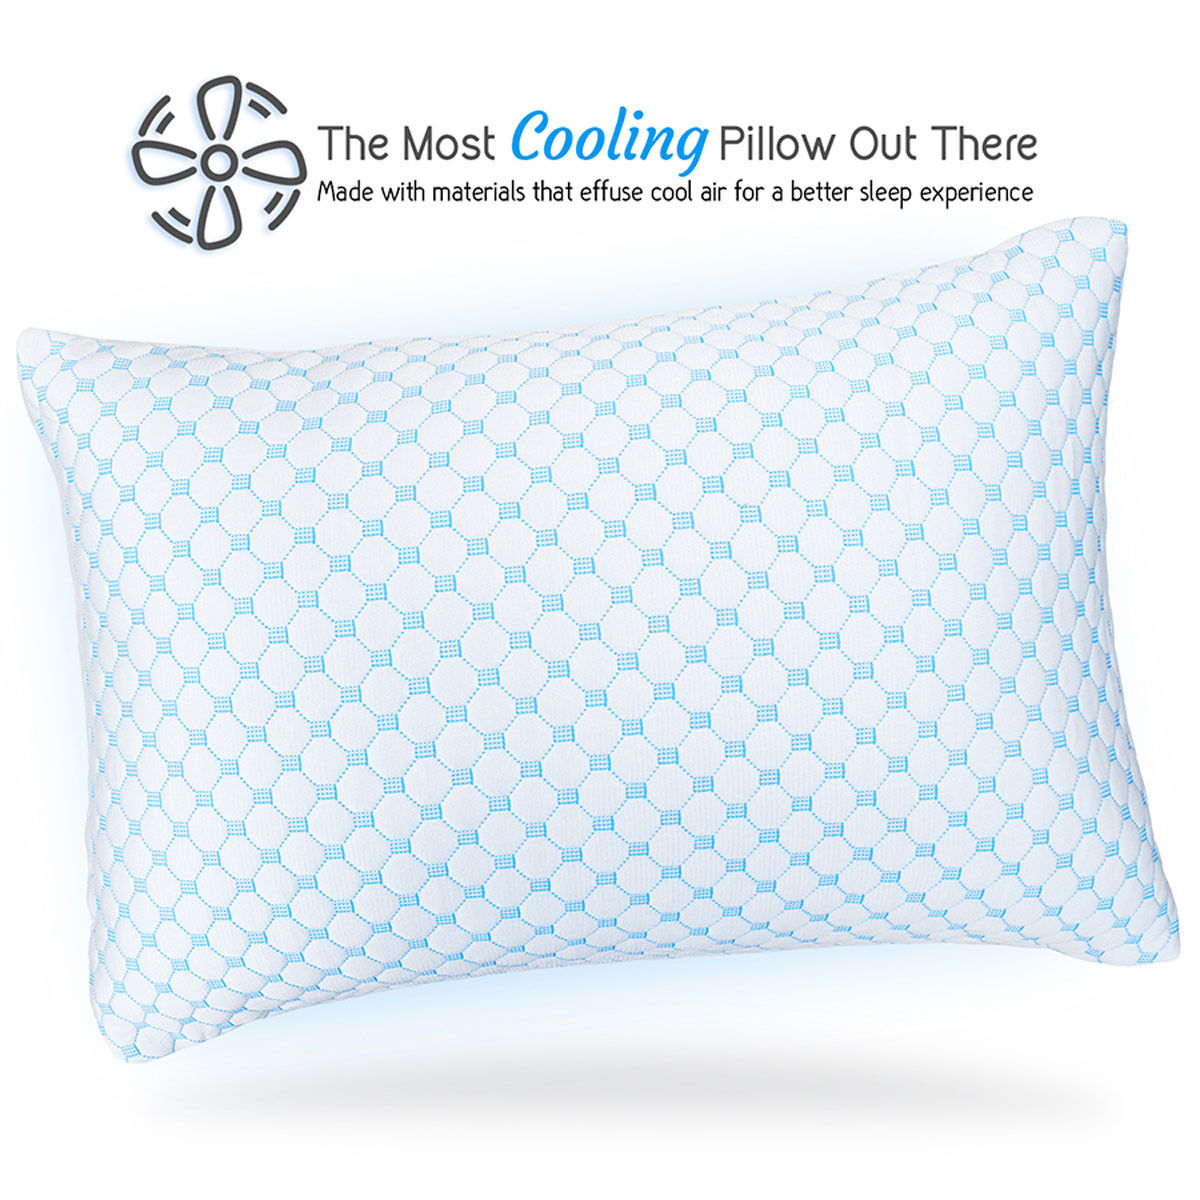 What certification does the Clara Clark pillow have?